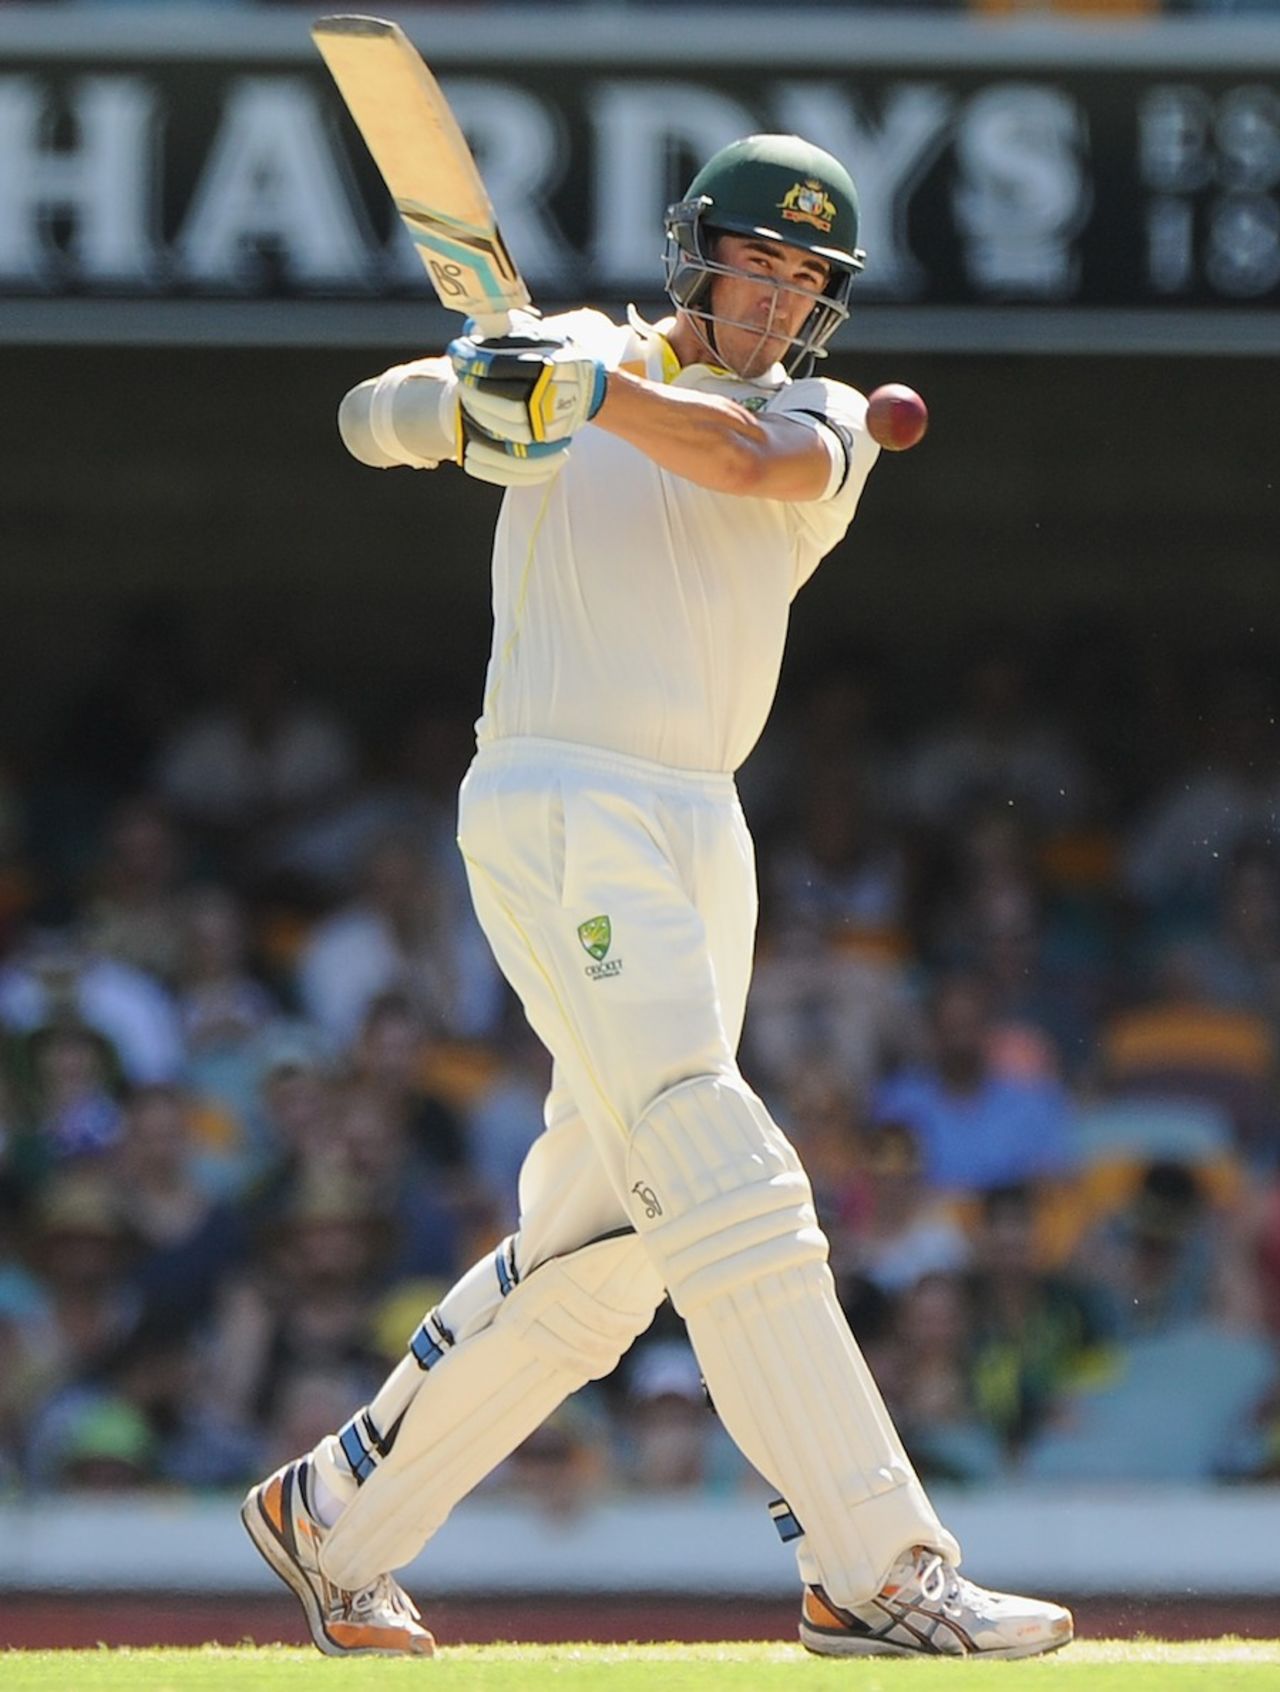 Mitchell Starc brought up his fifty off 53 balls, Australia v India, 2nd Test, Brisbane, 3rd day, December 19, 2014